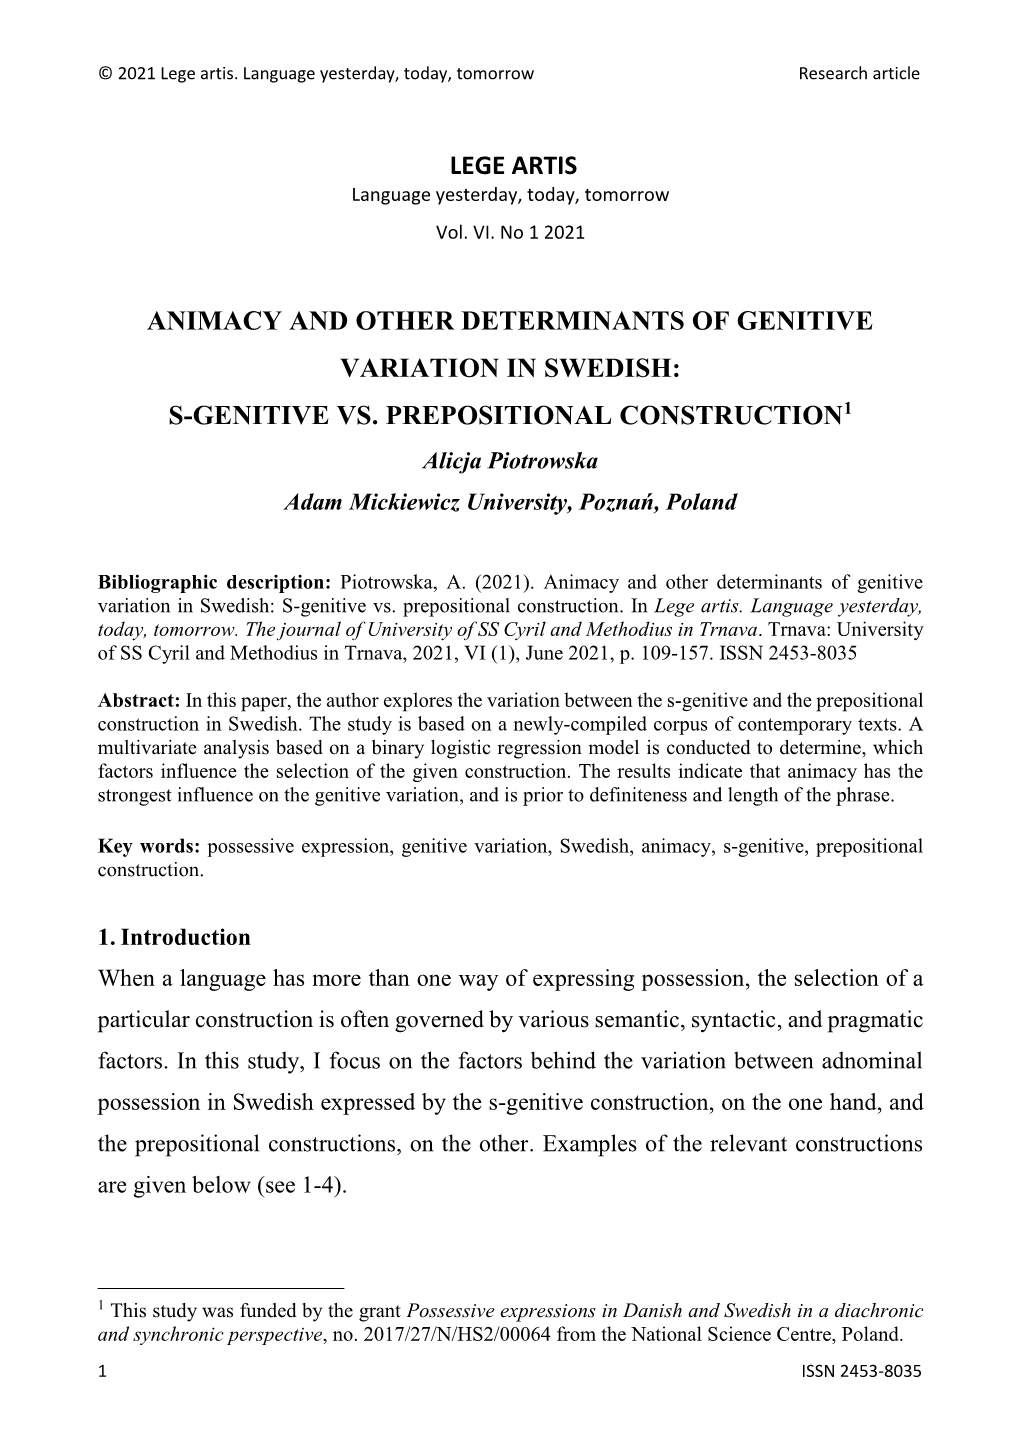 Lege Artis Animacy and Other Determinants of Genitive